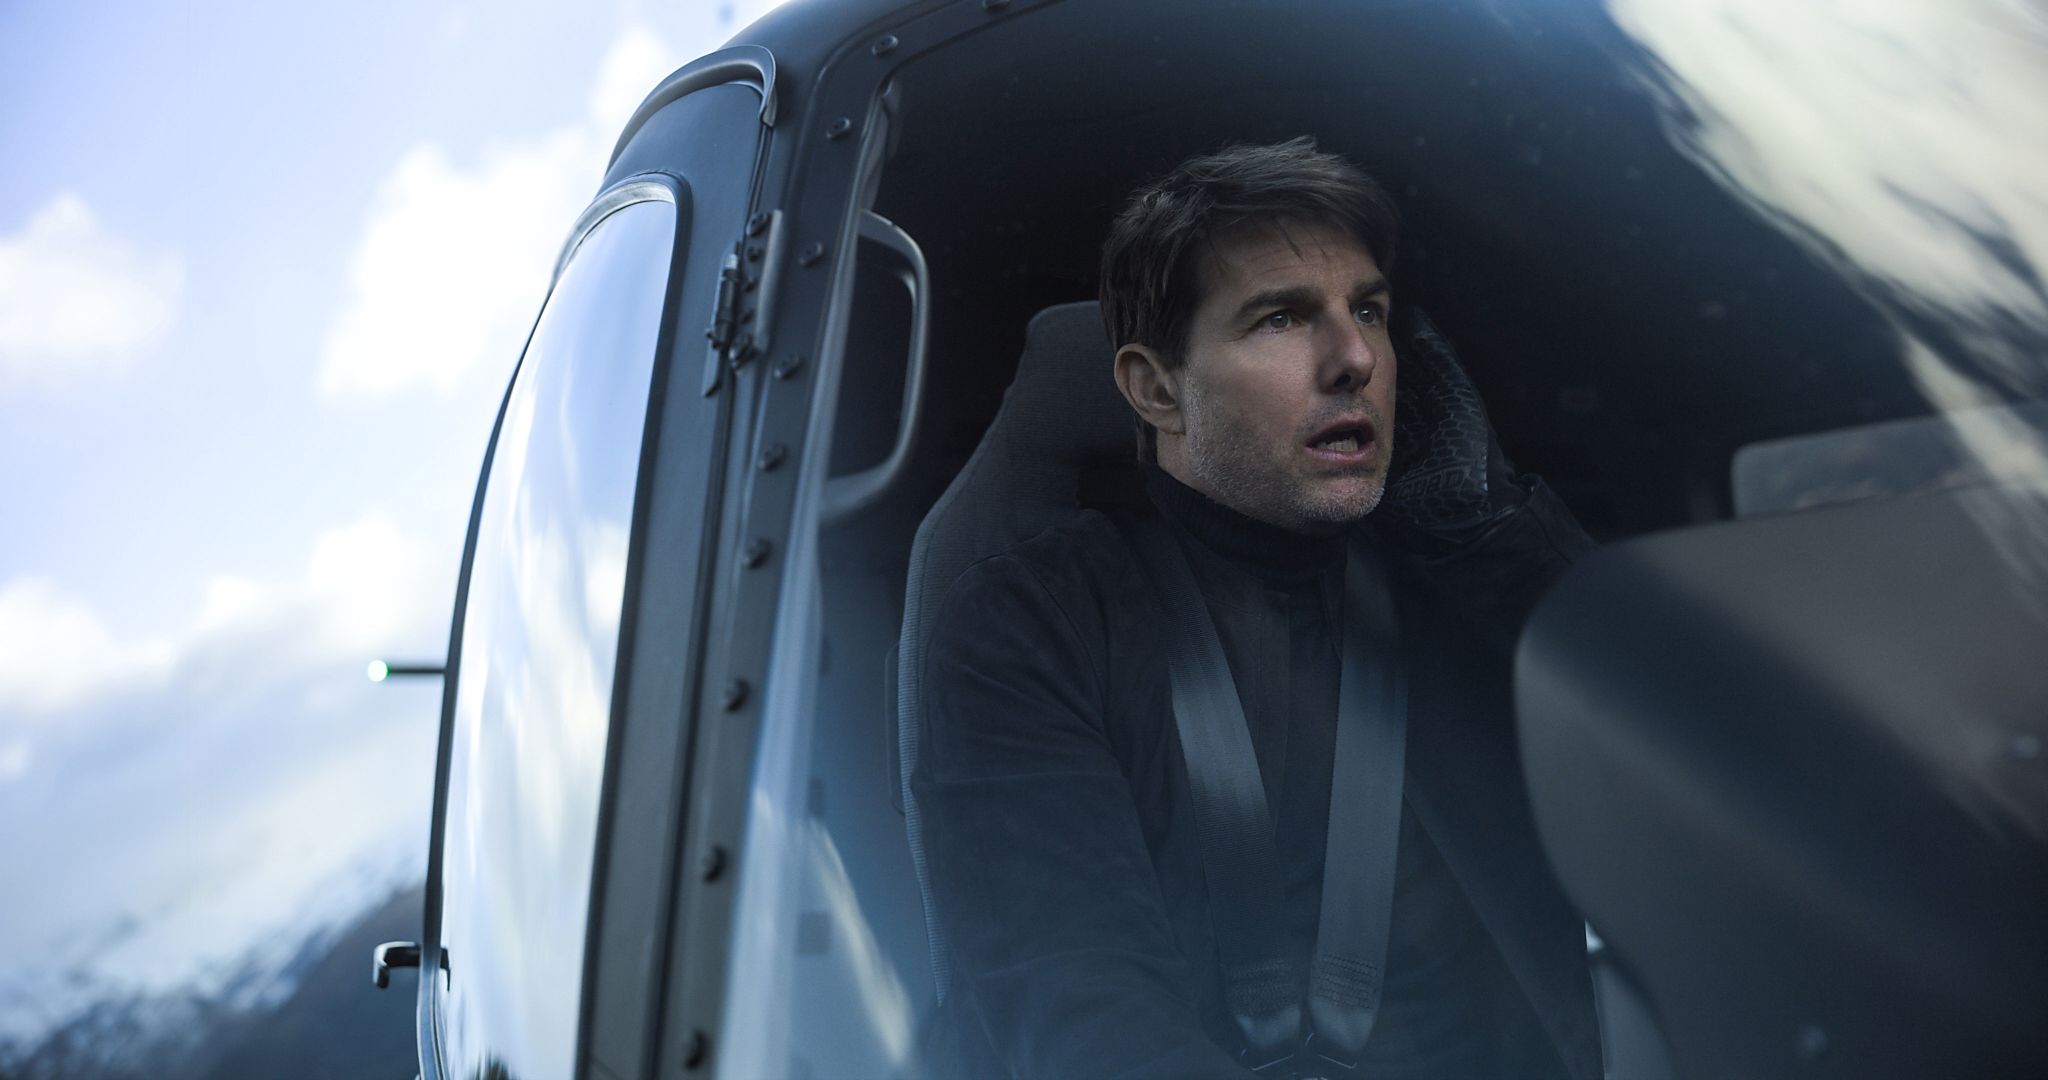 Tom Cruise in Mission: Impossible – Fallout